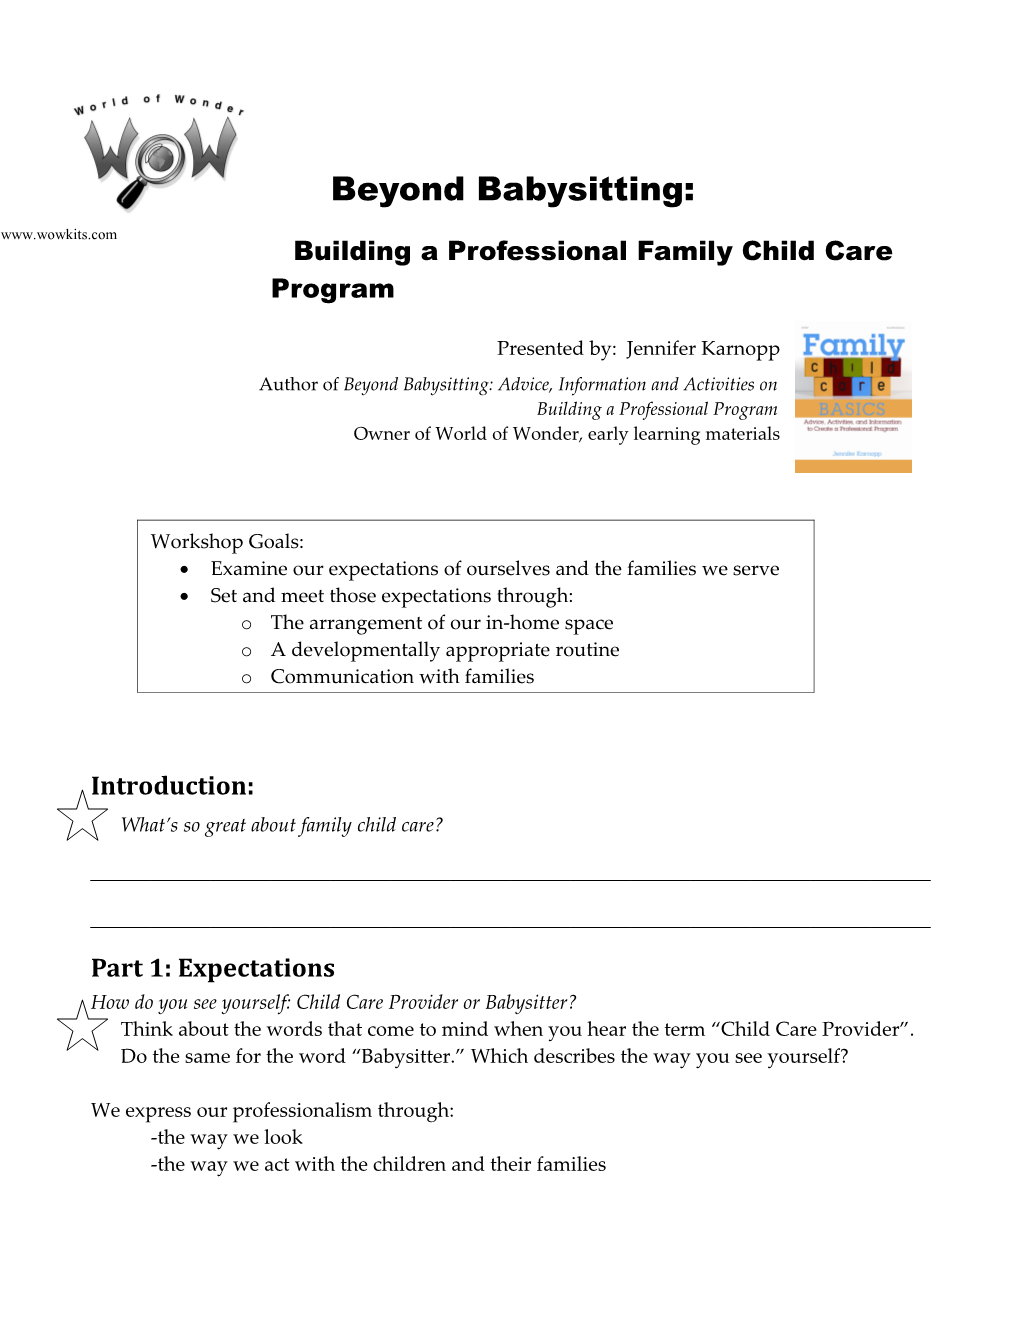 -Target Audience: Family Child Care Providers